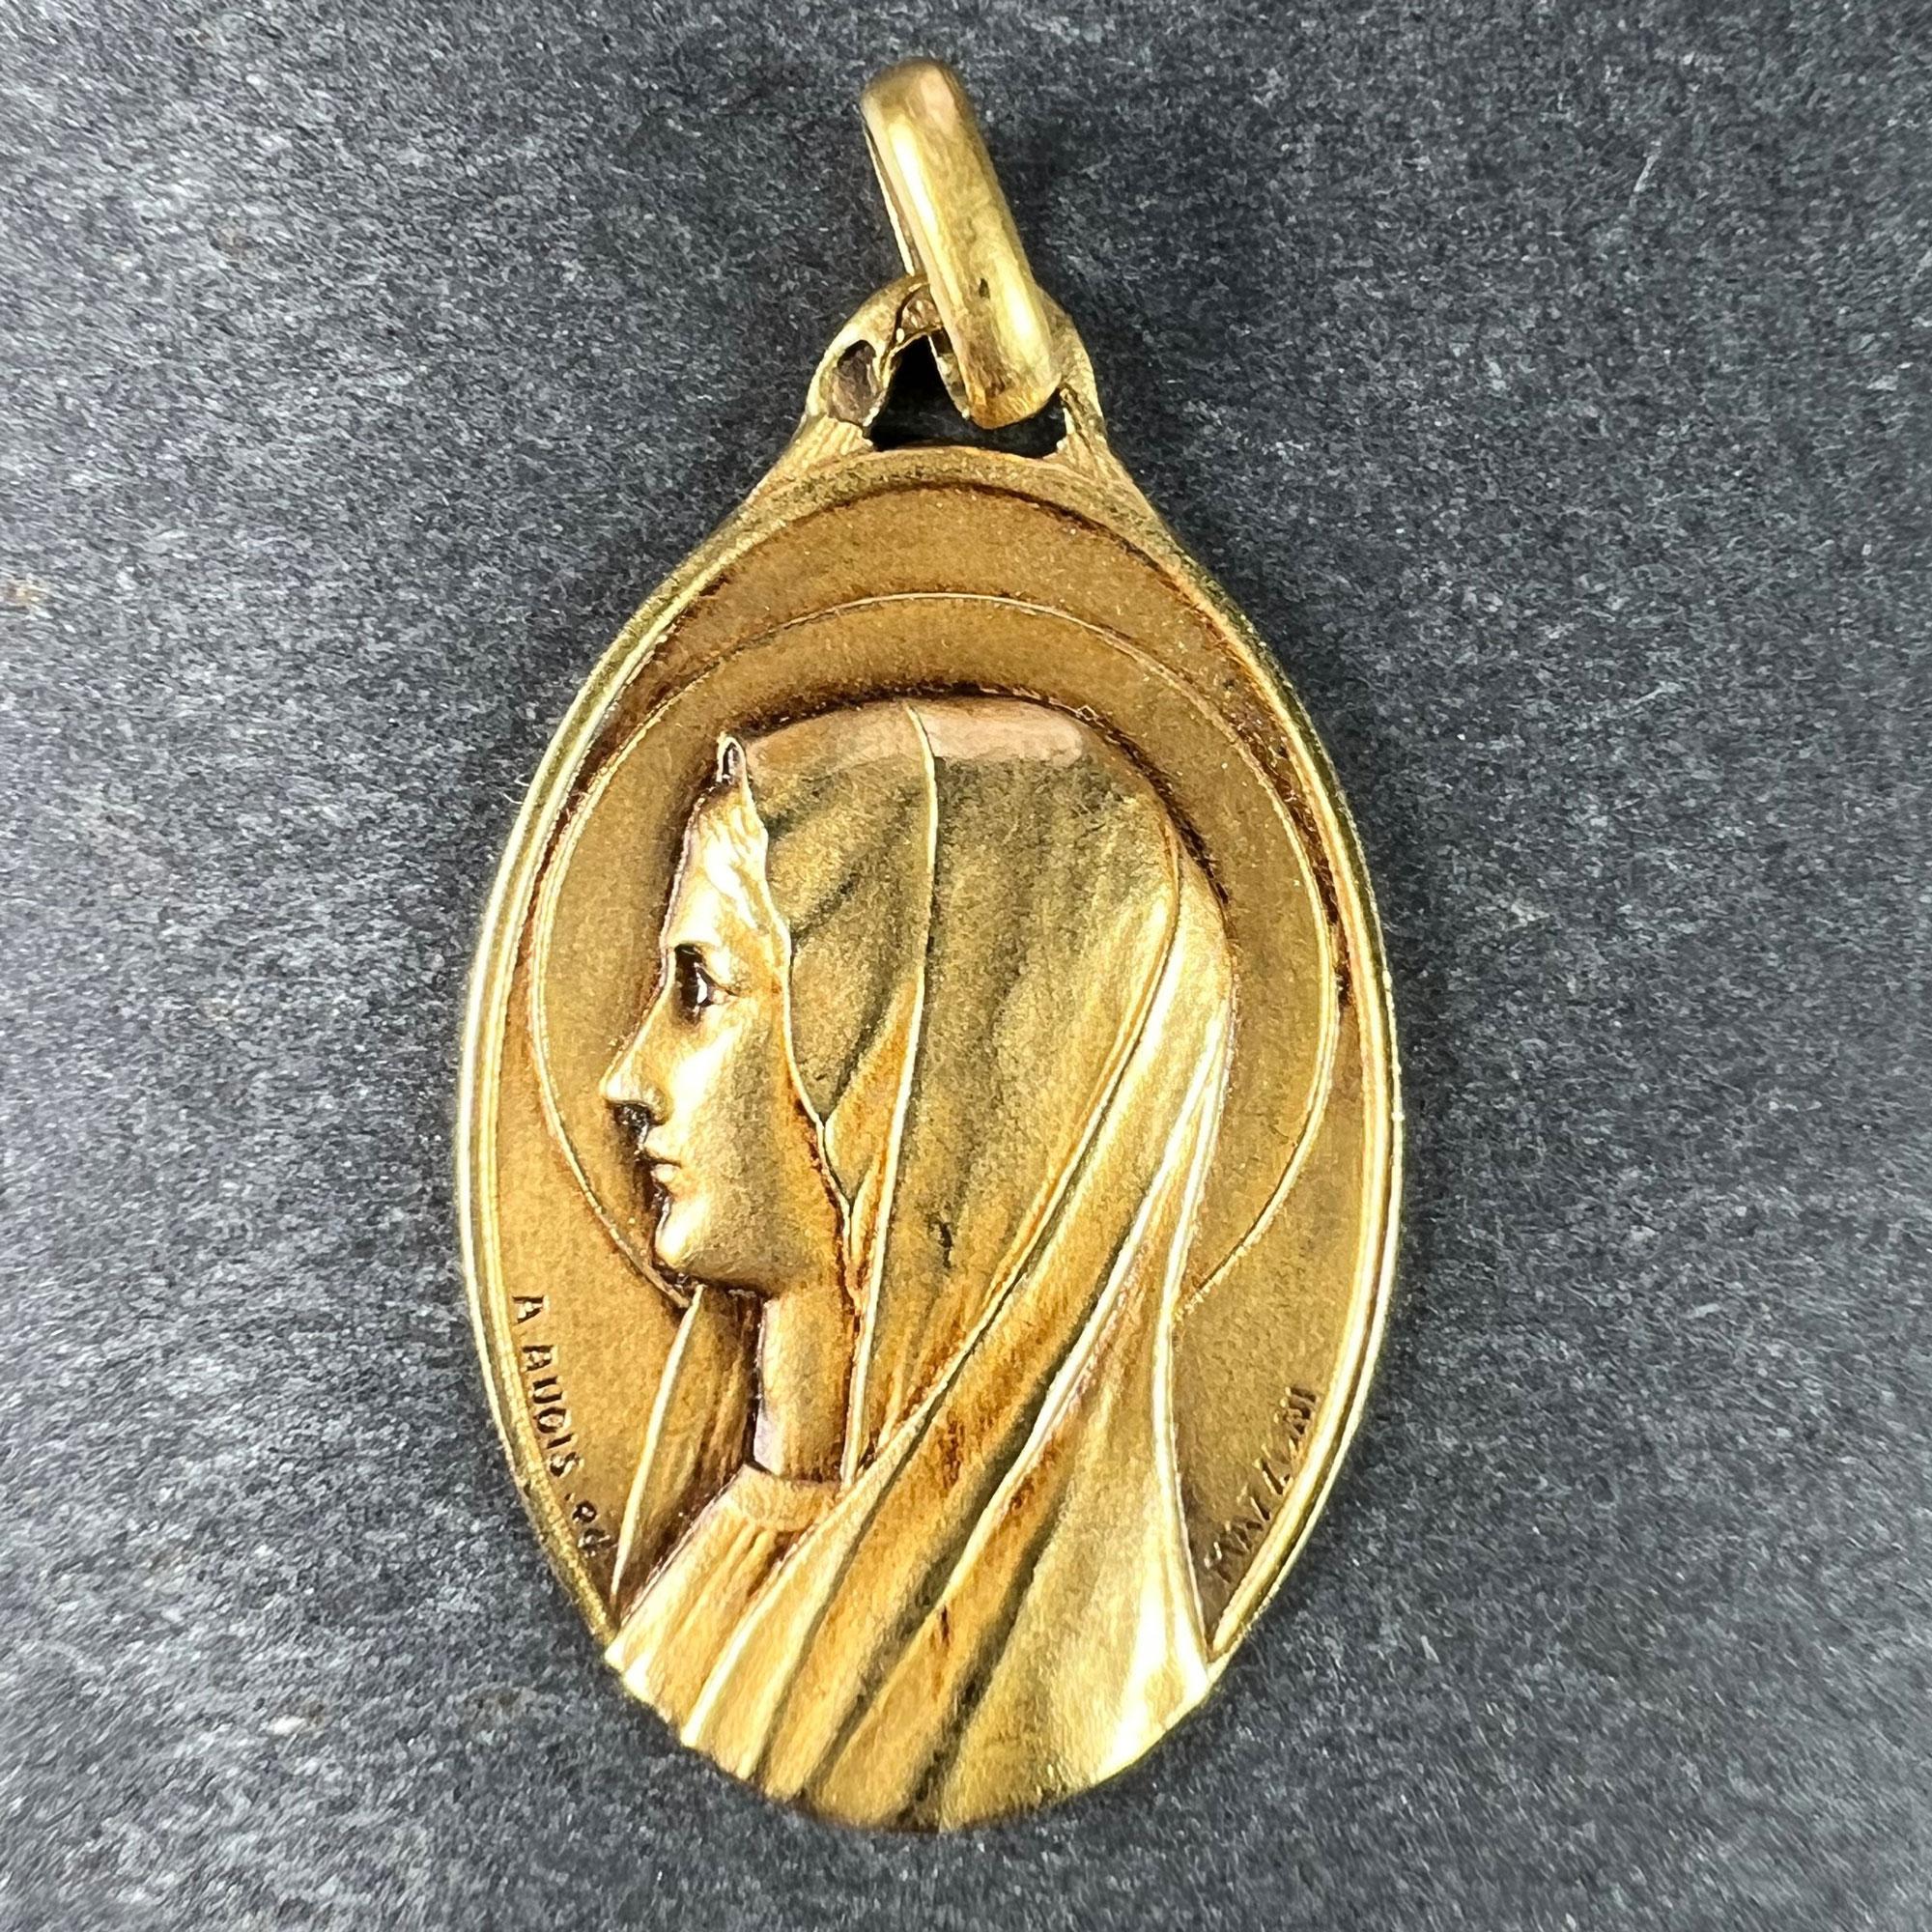 A French 18 karat (18K) yellow gold charm pendant depicting the Virgin Mary, signed A.Augis ED (made by) and Mazzoni SC (sculptor). Engraved to the reverse with the monogram SJ/JS and the date 10 Mai 1934. Stamped with the eagles head for French